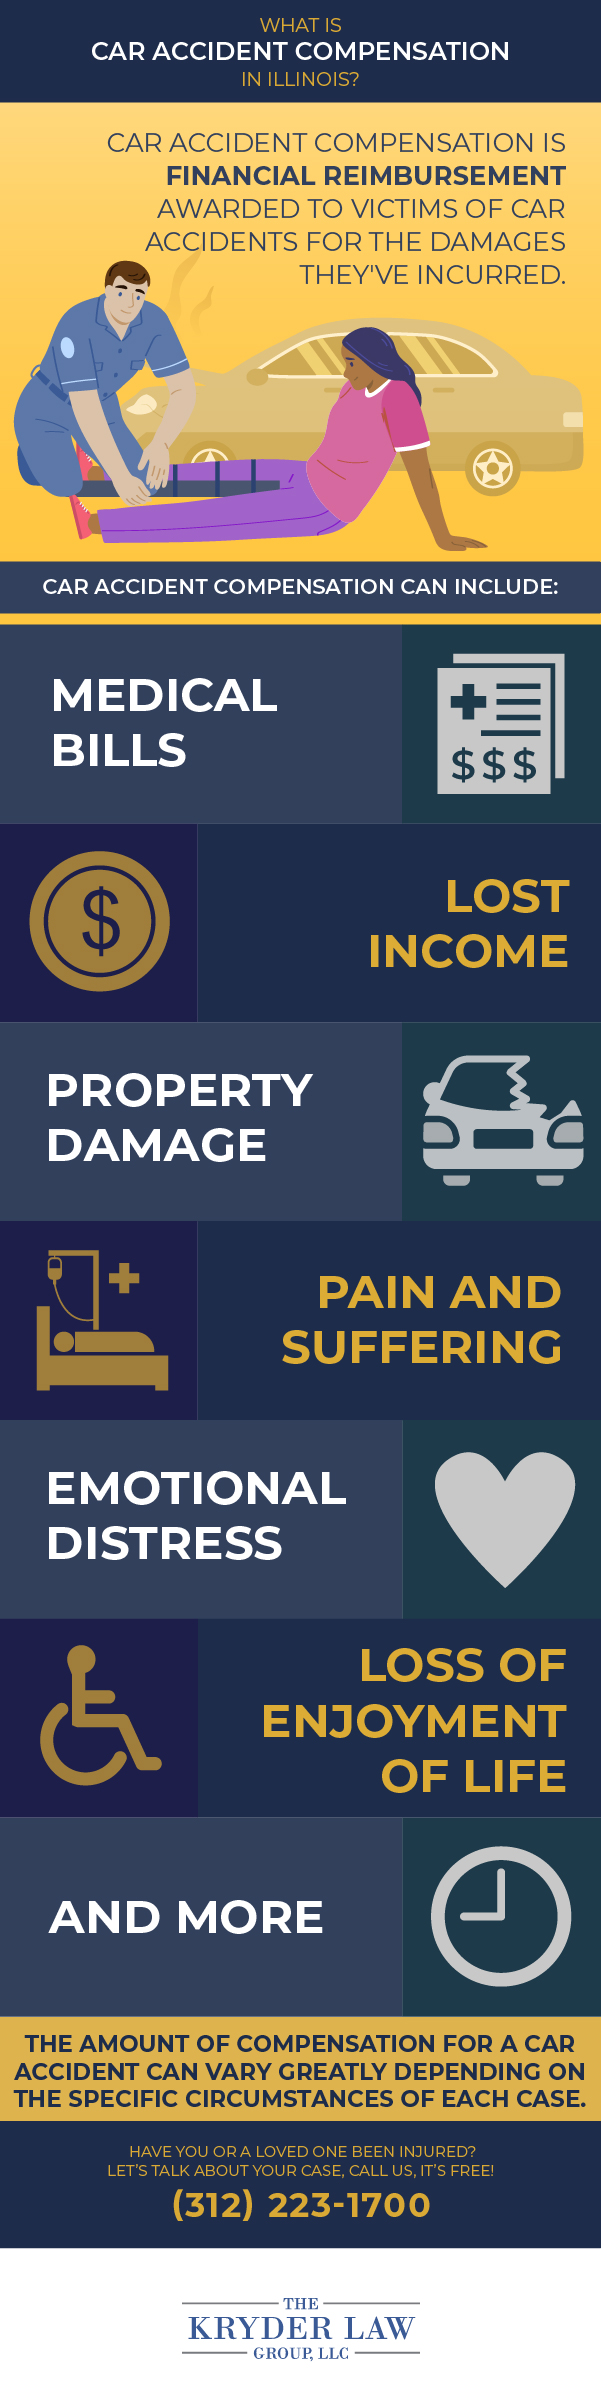 What Is Car Accident Compensation in Illinois?